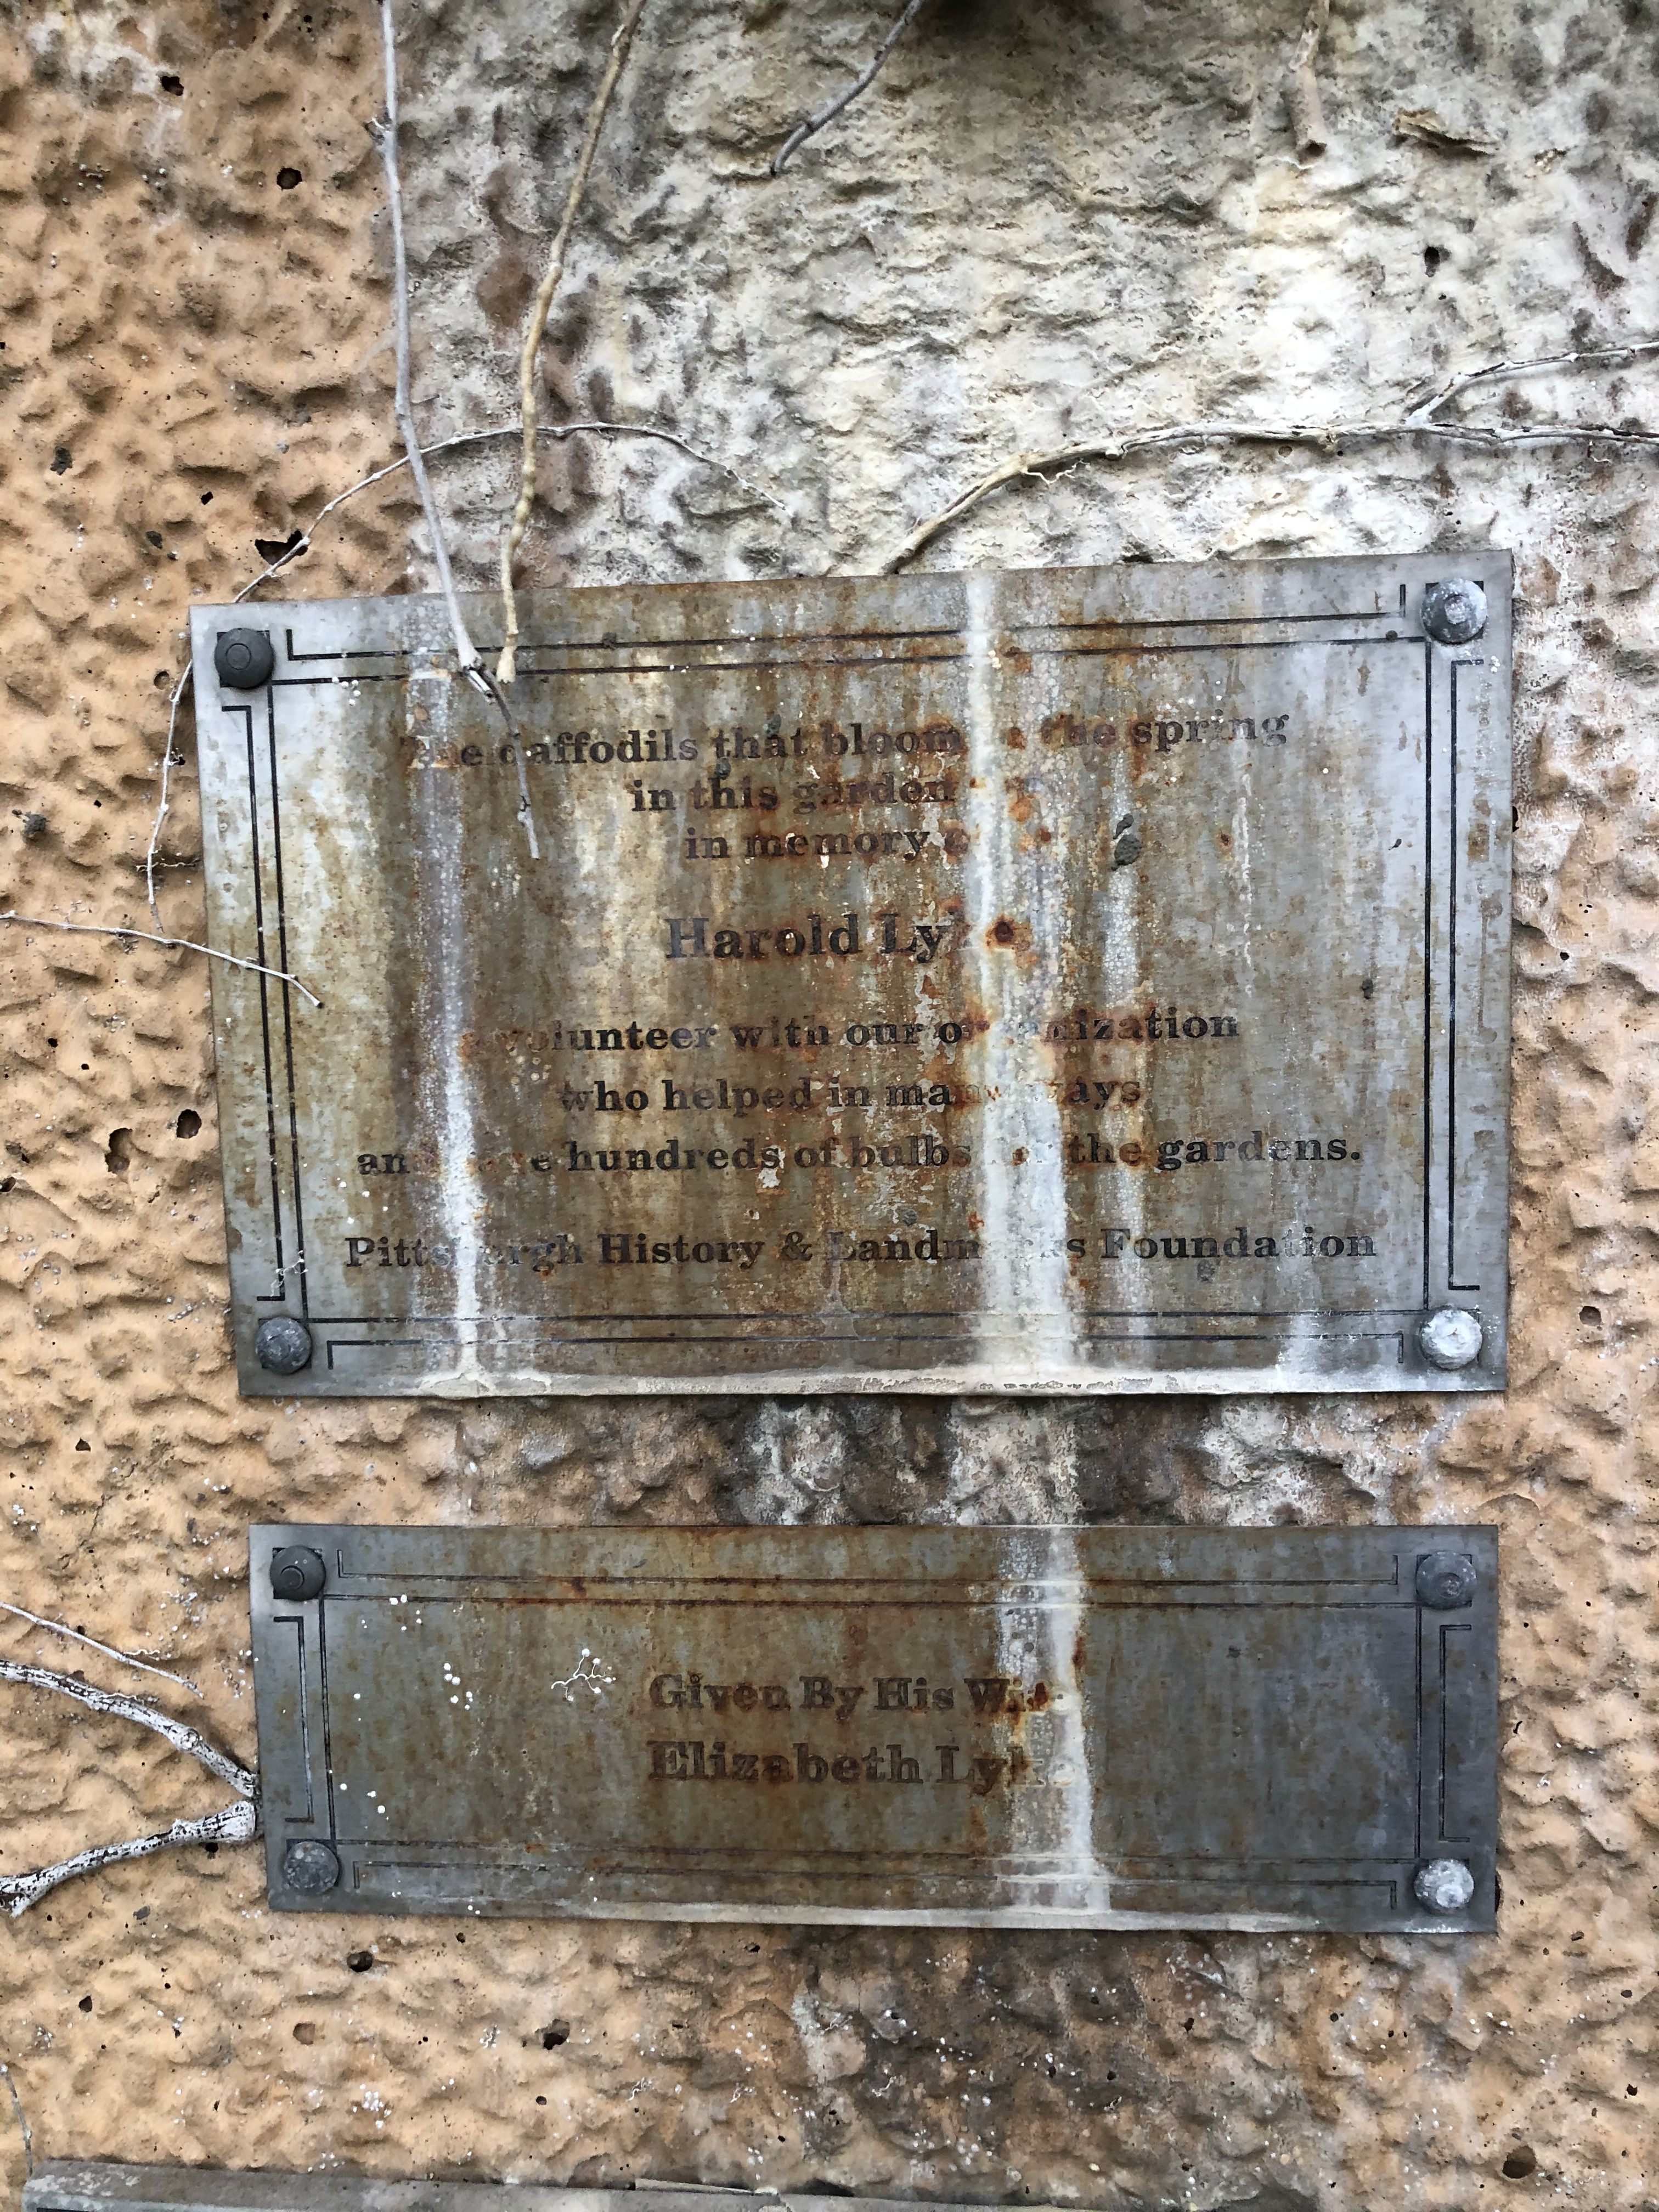 Dedication plaques nearby